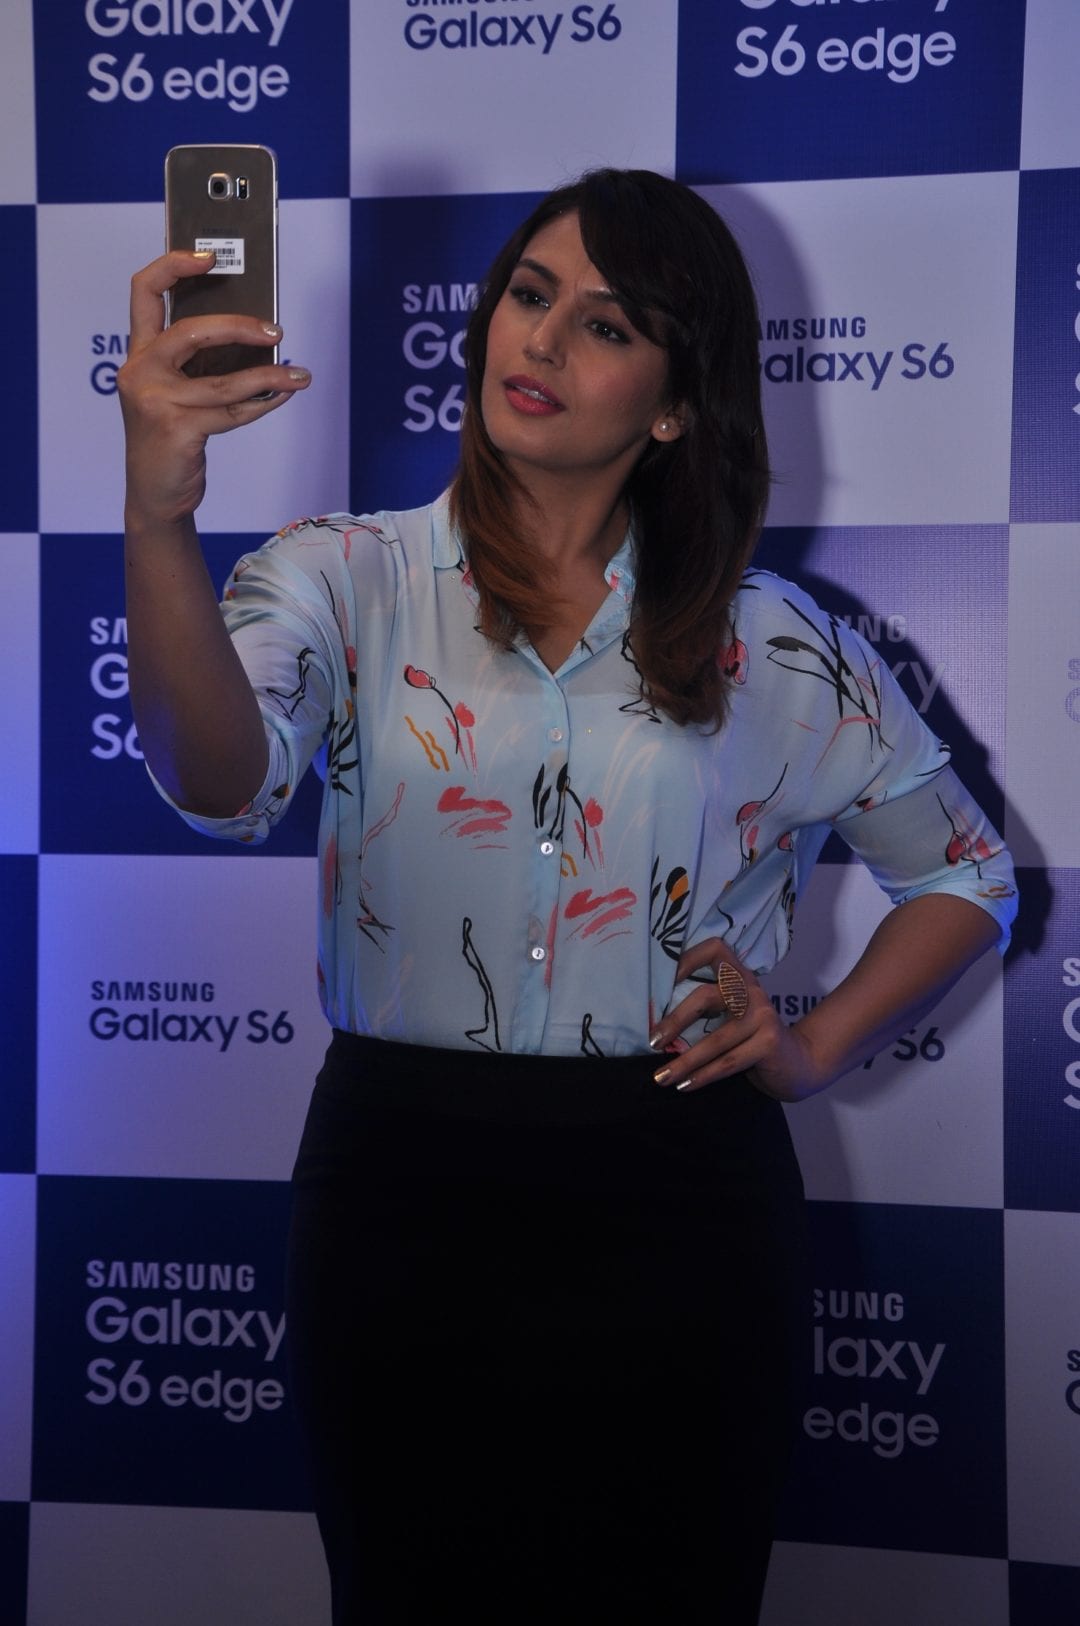 Bollywood actress Huma Qureshi at Samsung Galaxy S6 & S6 edge consumer launch event in Gurgaon today.